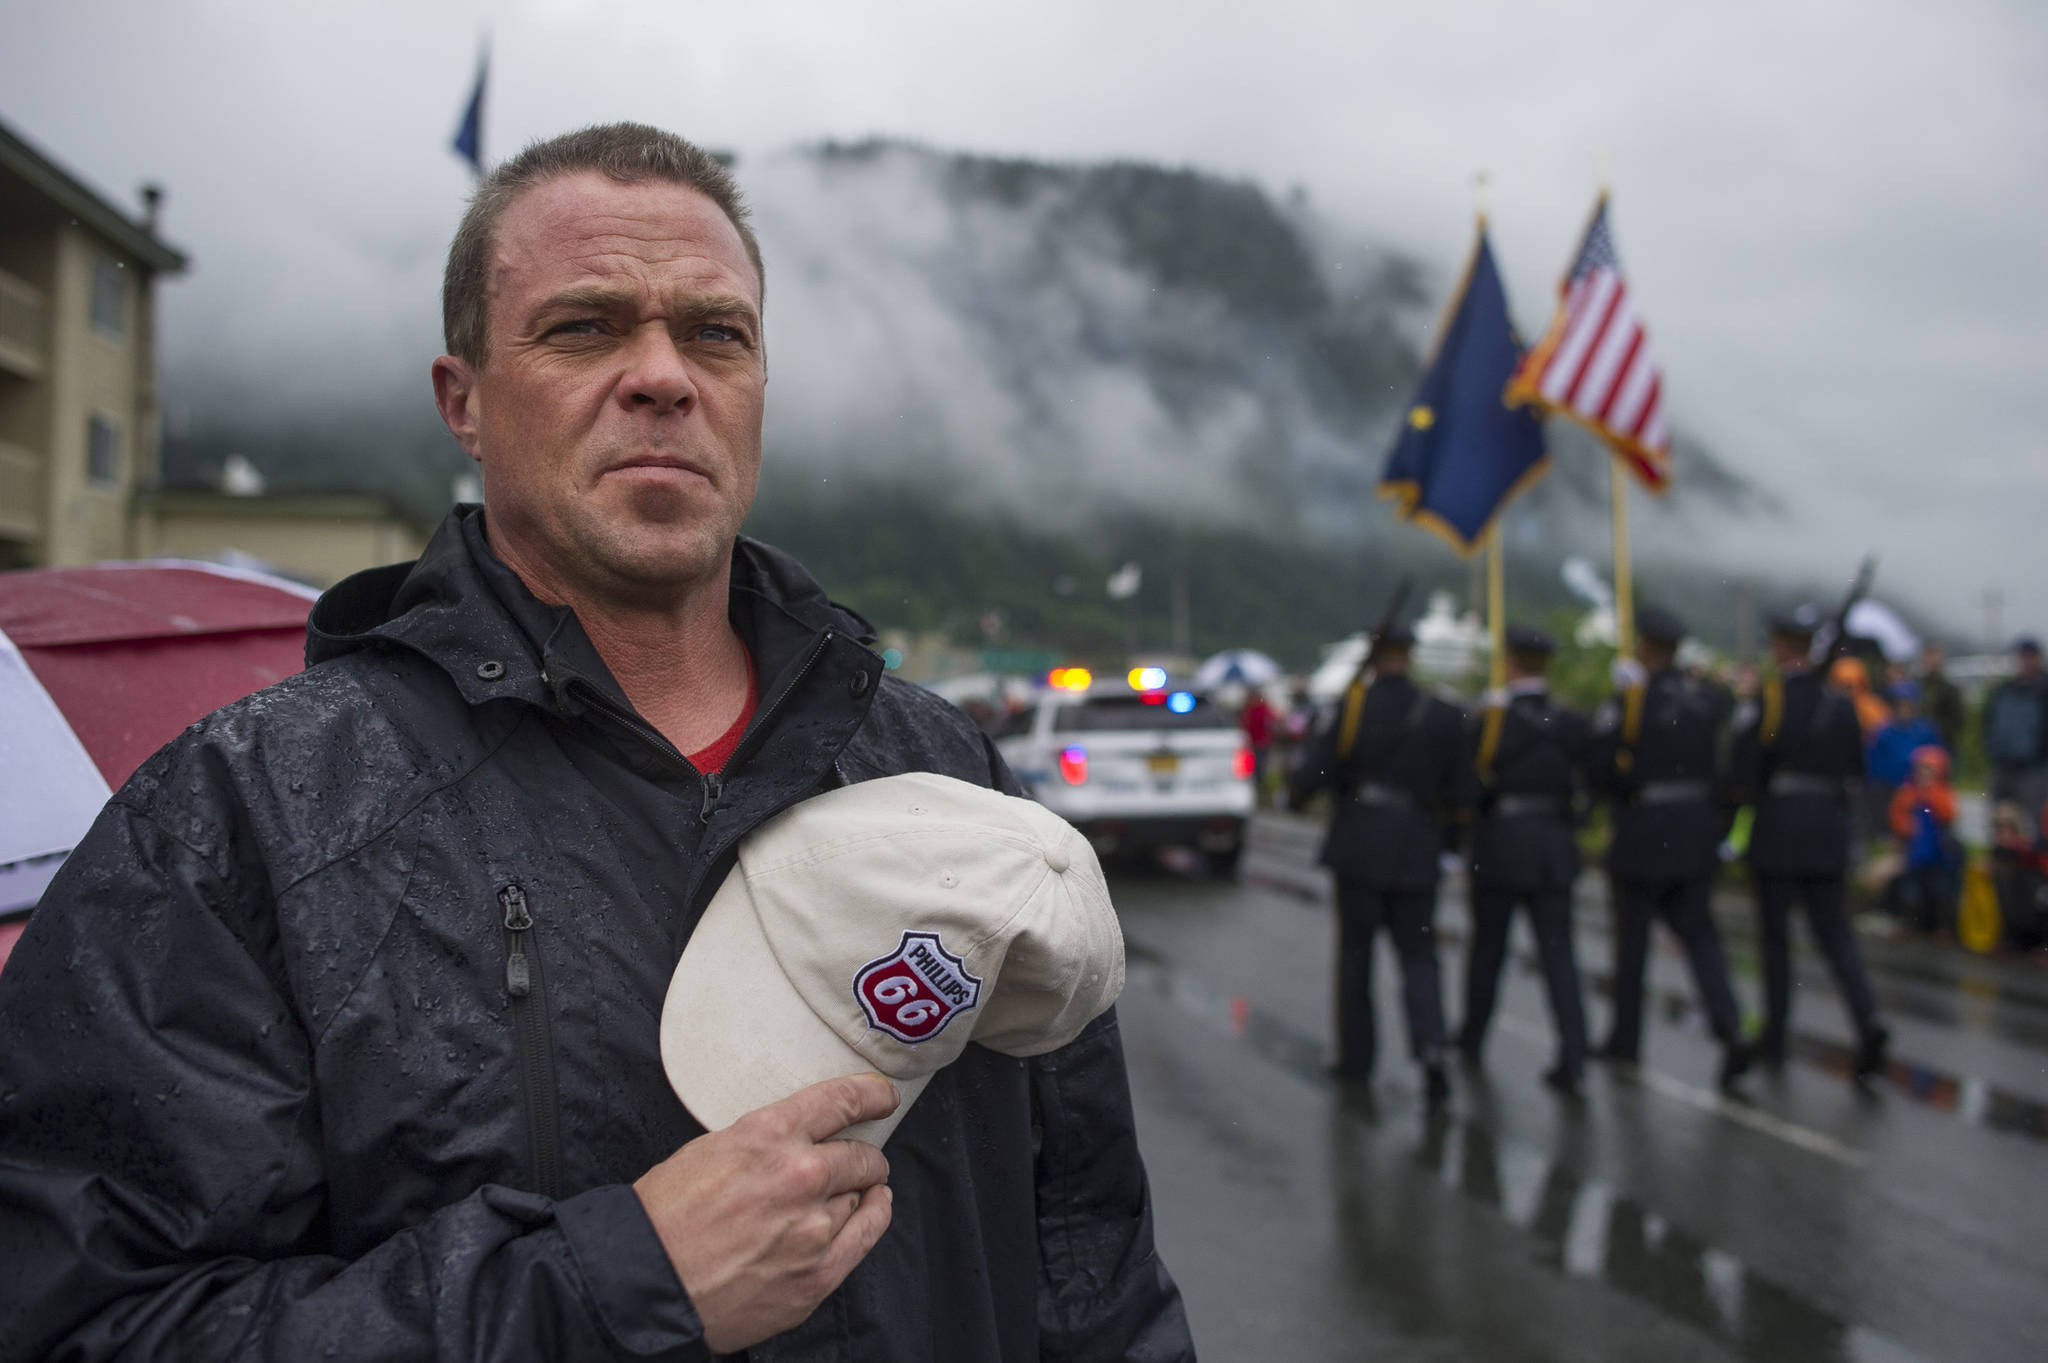 John Grama takes his hat off as a float of veterans nears during the Juneau 4th of July parade on Tuesday, July 4, 2017. (Michael Penn | Juneau Empire)